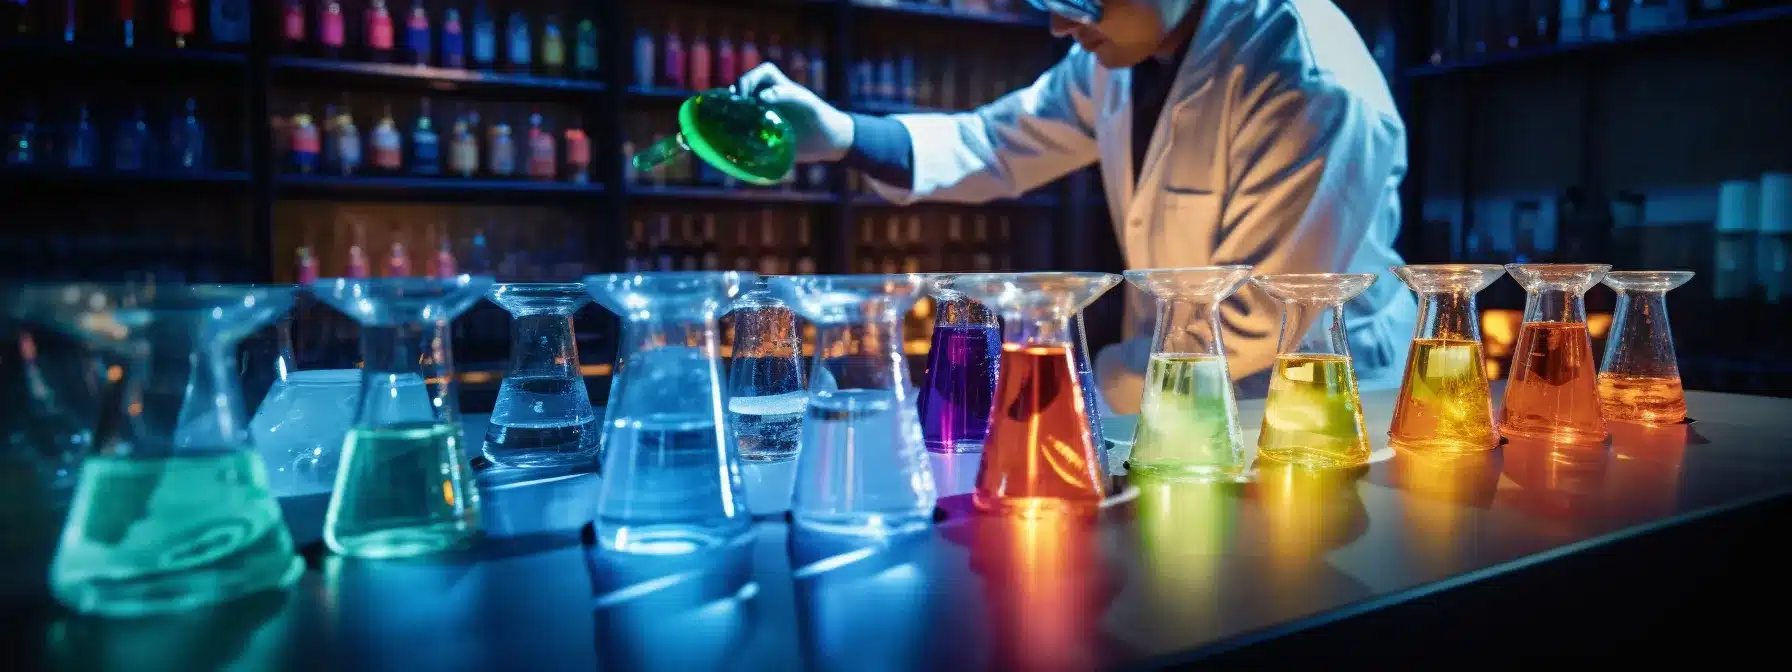 A Person In A Lab Coat Pouring Colorful Liquid From Beakers Into A Larger Container, With Symbols Of Innovation And Market Growth On The Walls.